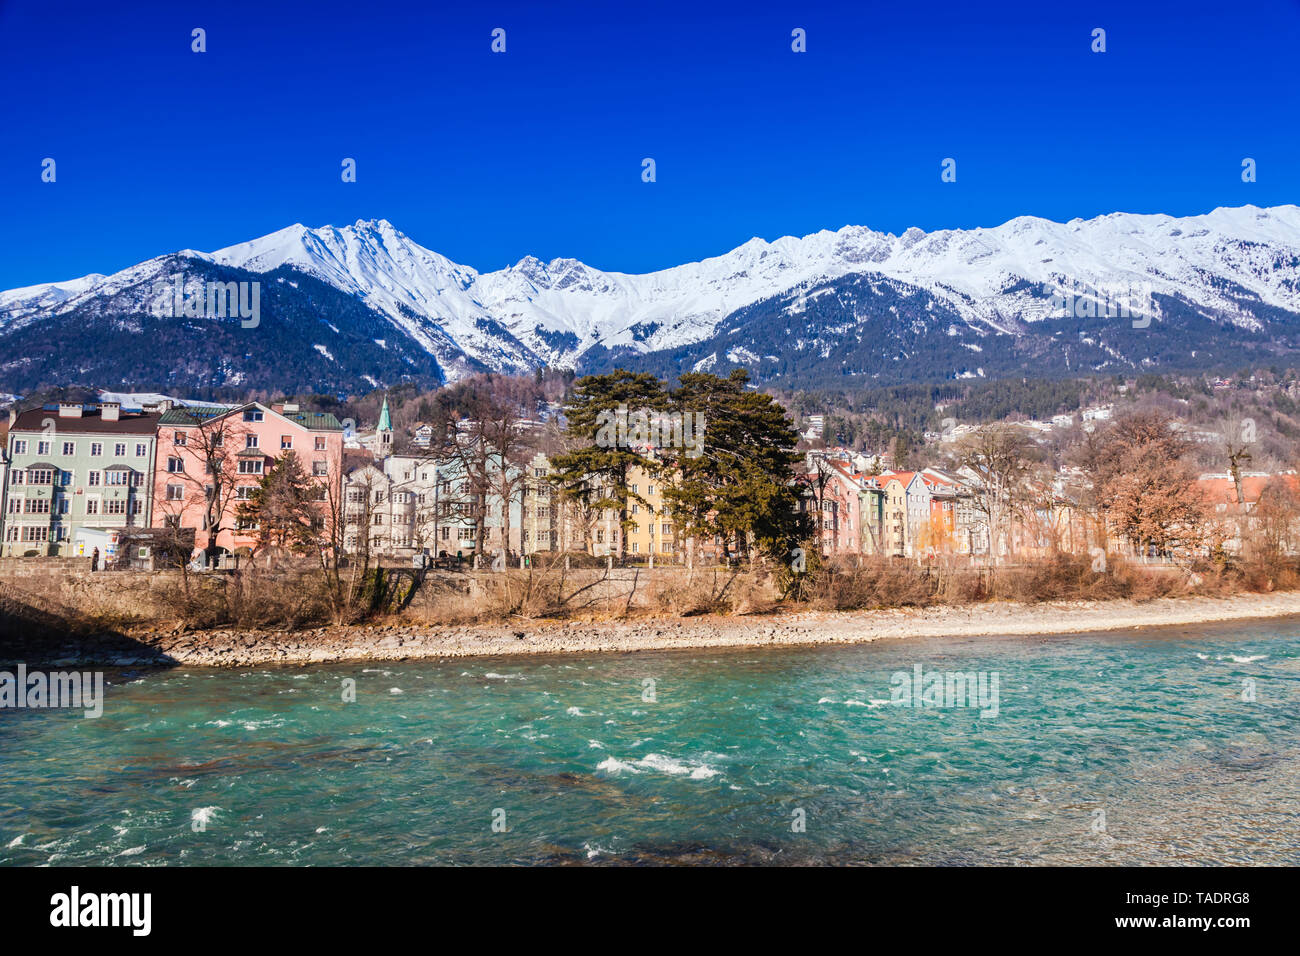 Austria, Tyrol, Innsbruck, colored buildings along the Inn river with snow-capped Alps in background Stock Photo